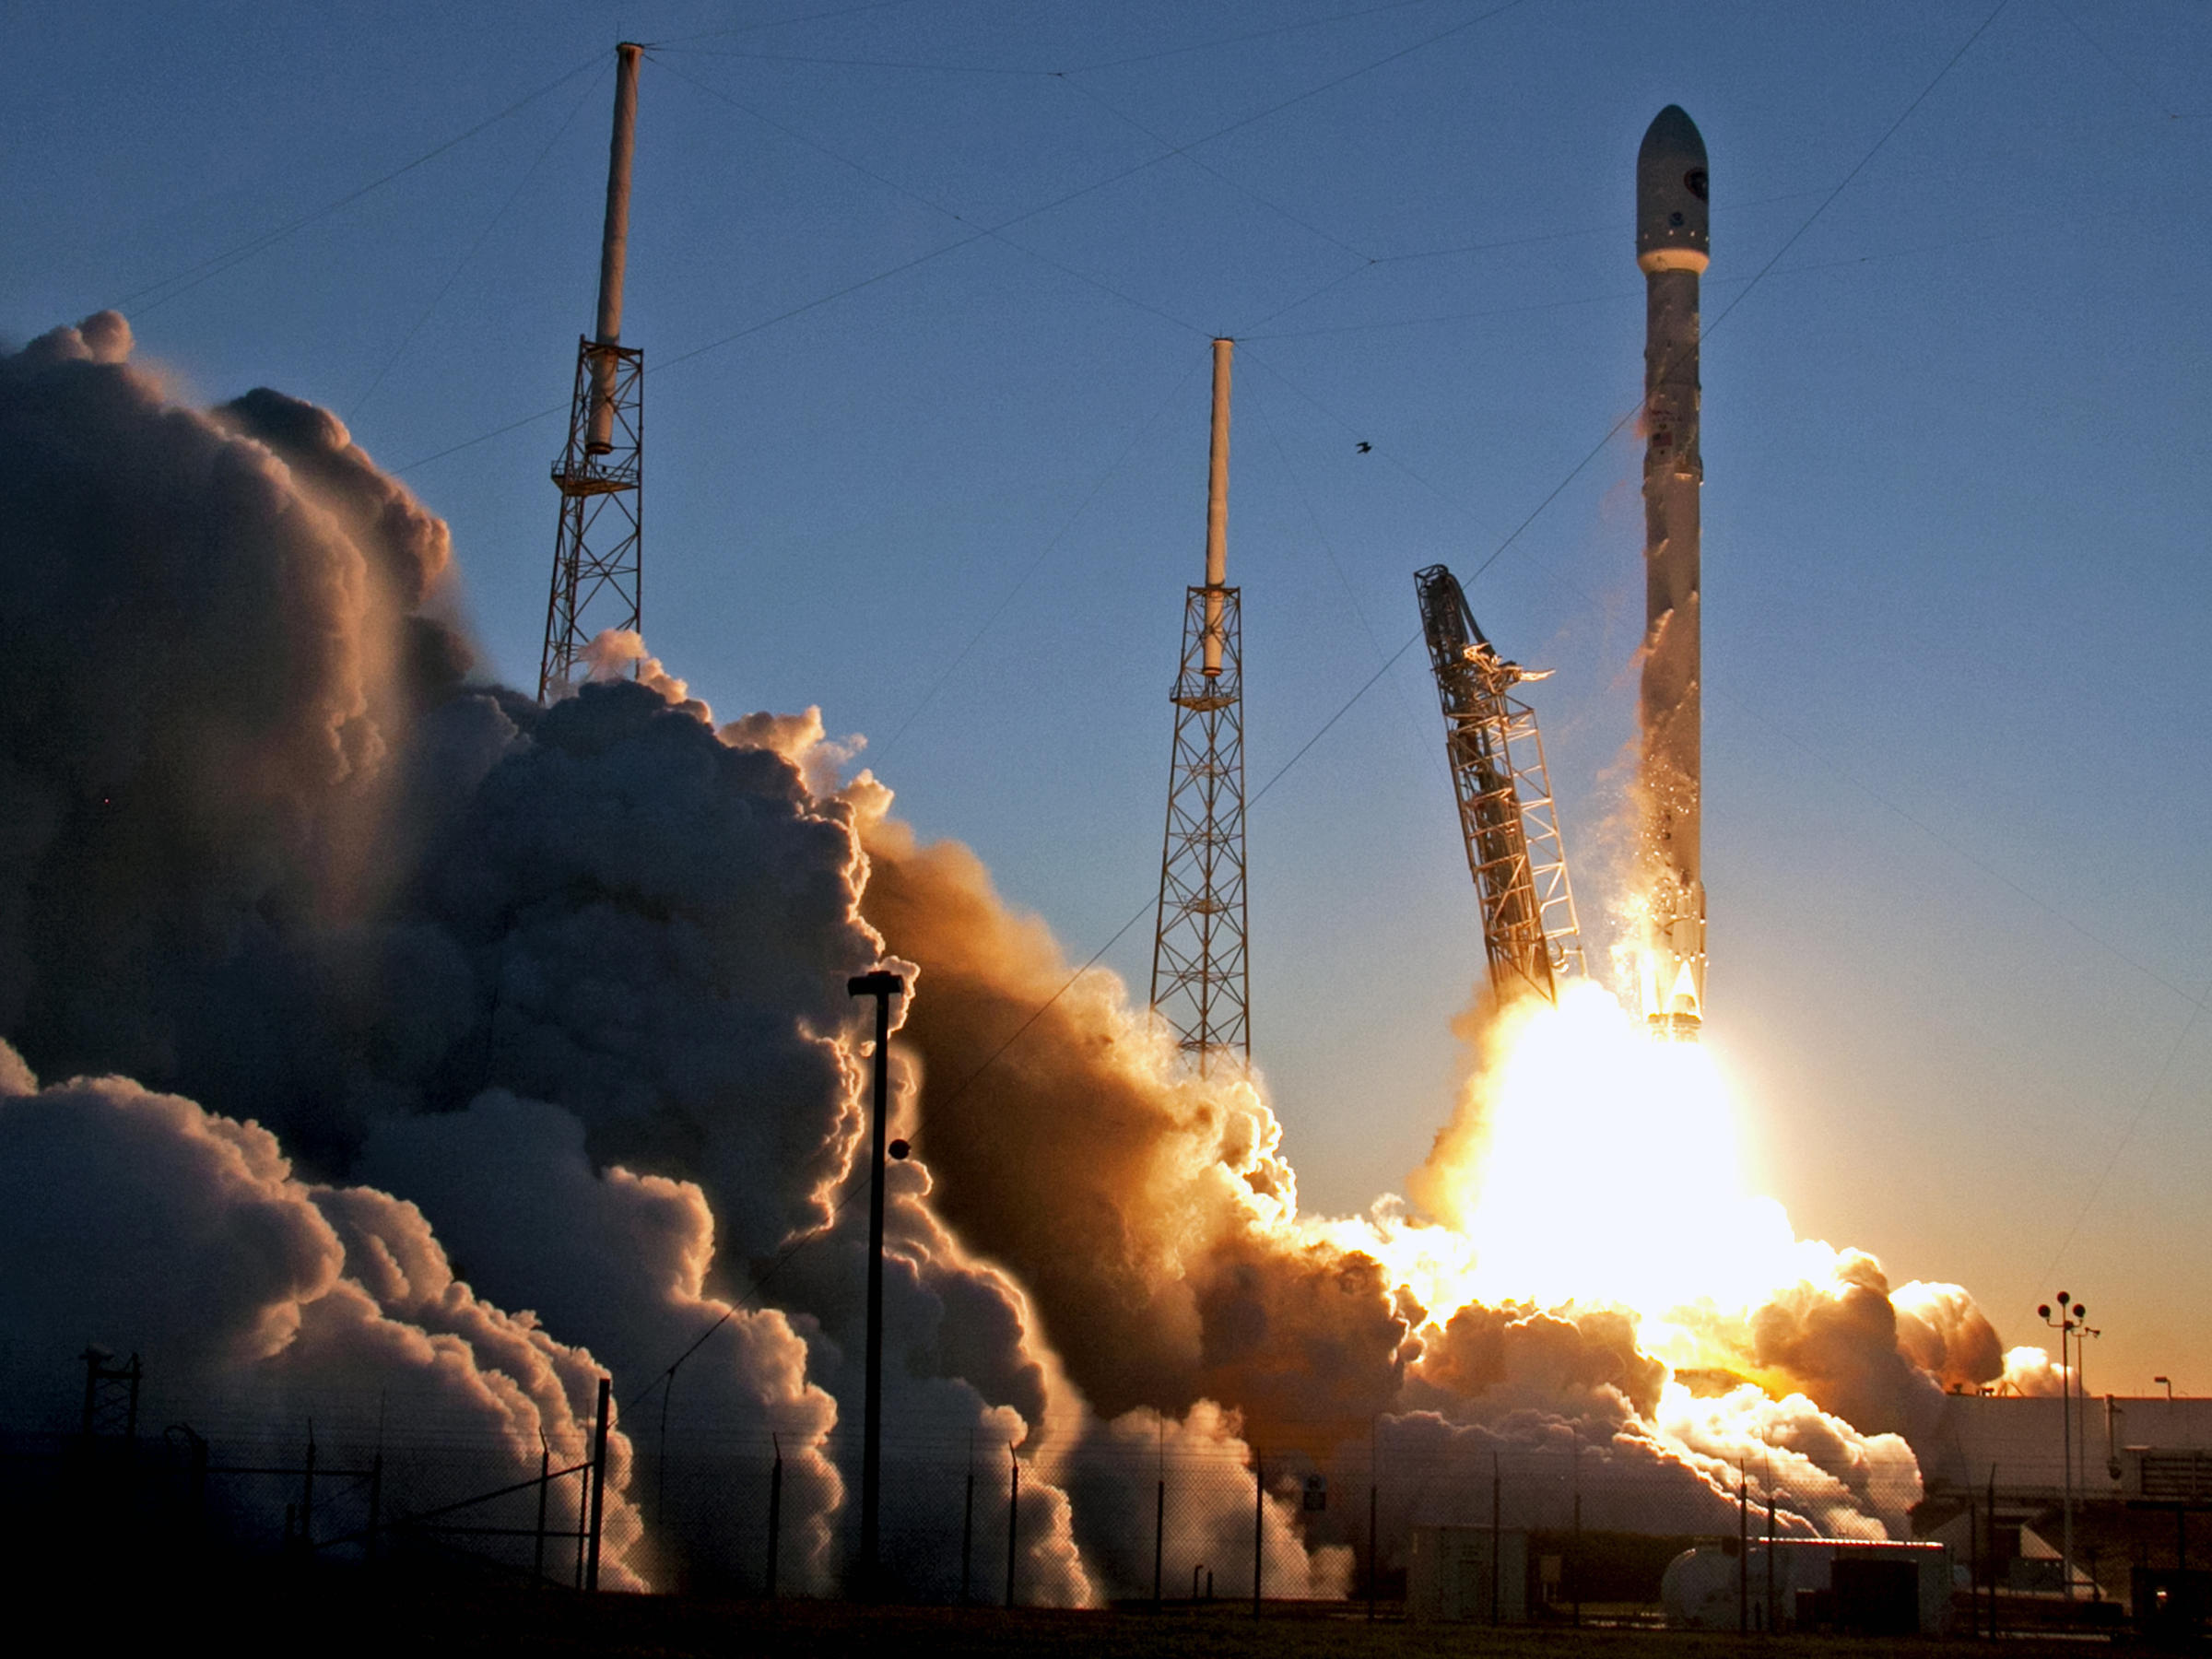 Storm Clouds Delay SpaceX Spacecraft Launch WUSF News